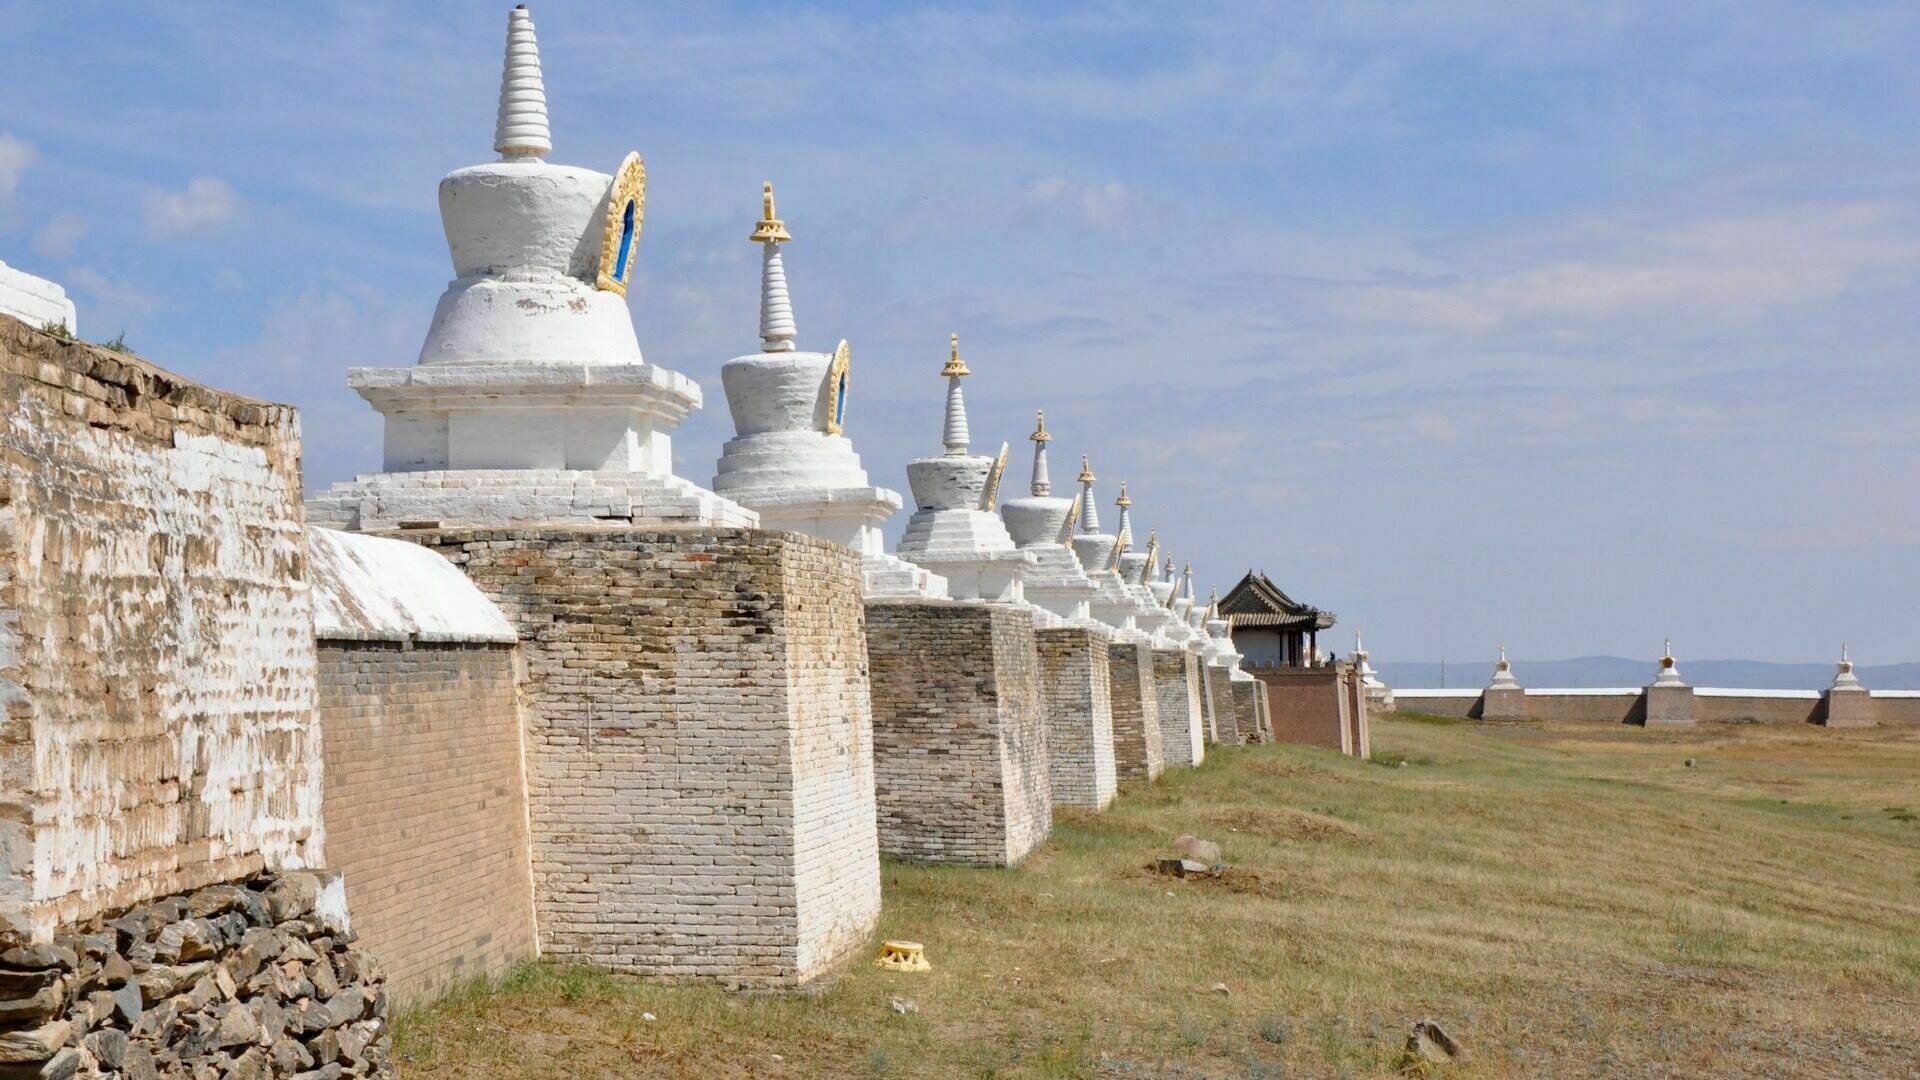 The capital of Genghis Khan will be restored in Mongolia